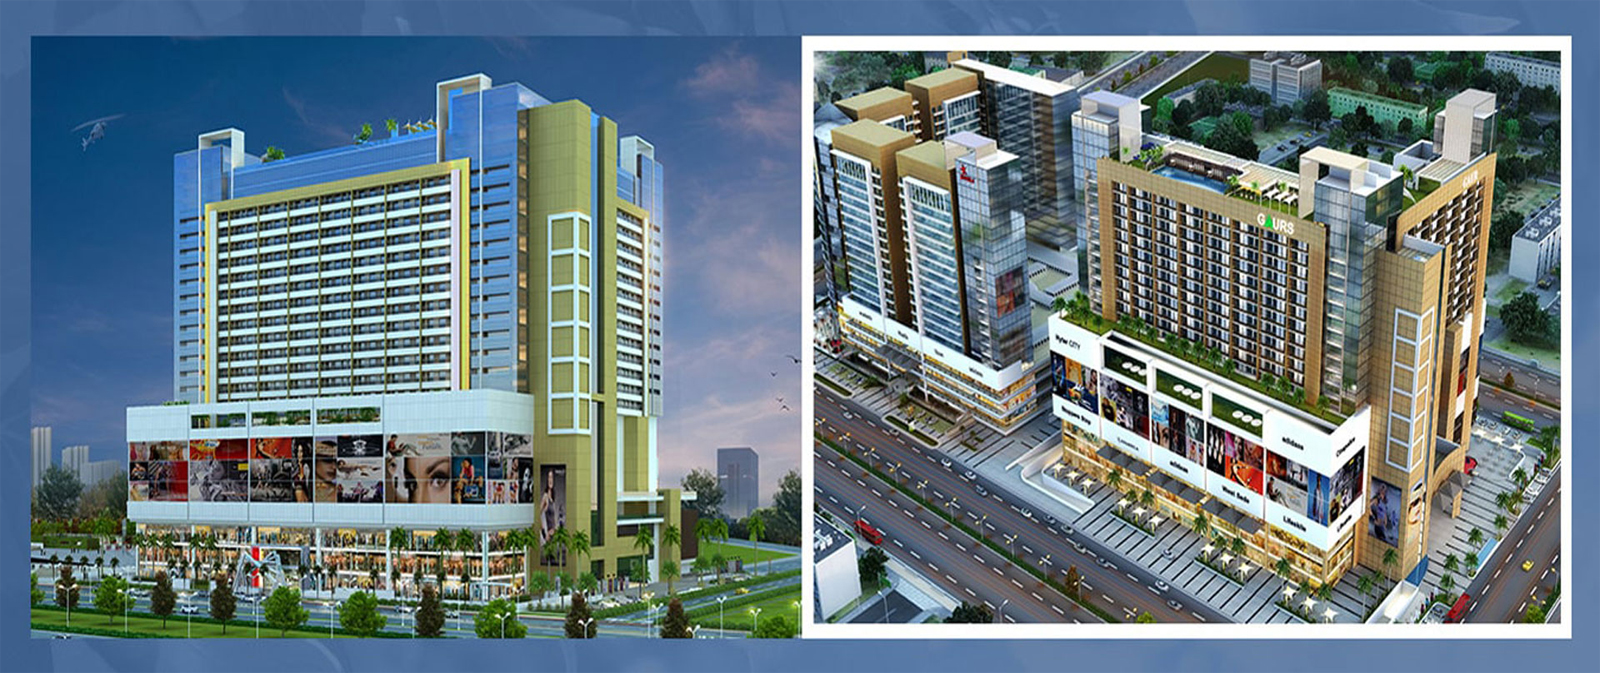 Gaur Sector 129 Noida, Expressway, Commercial, Residential